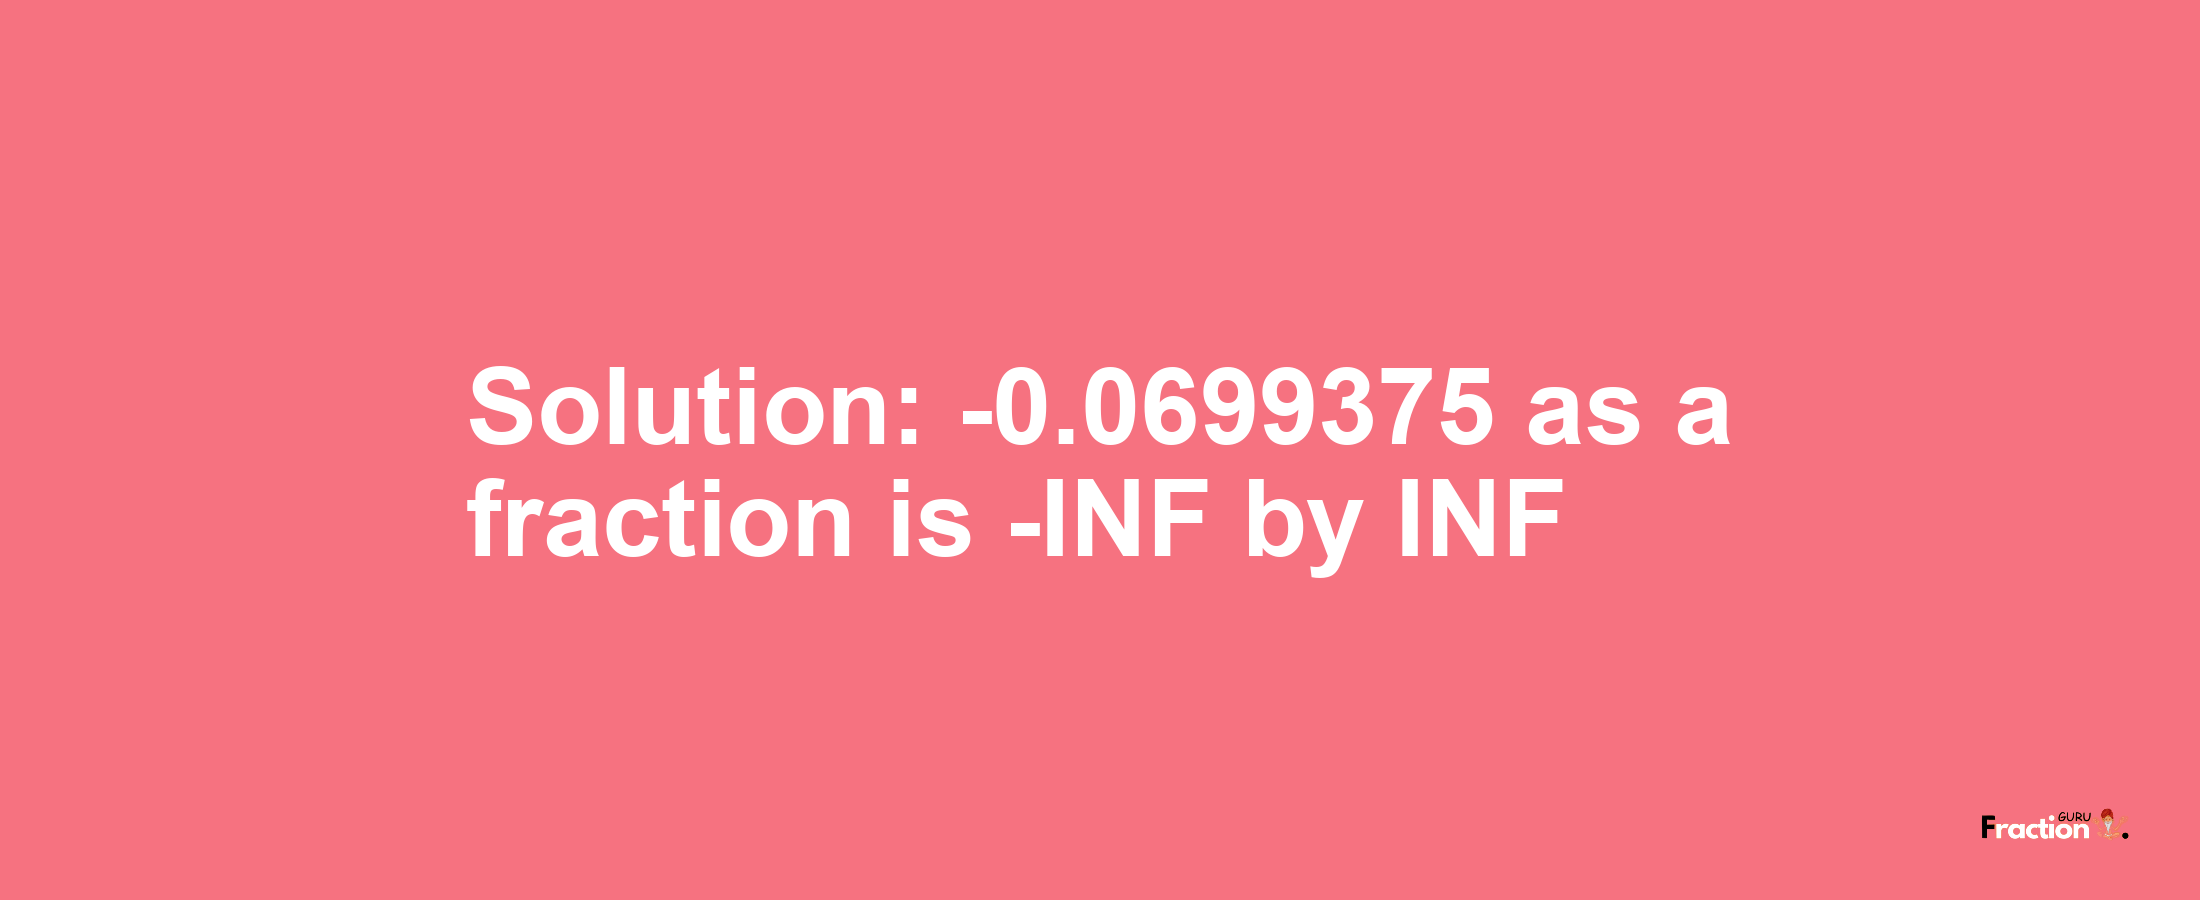 Solution:-0.0699375 as a fraction is -INF/INF